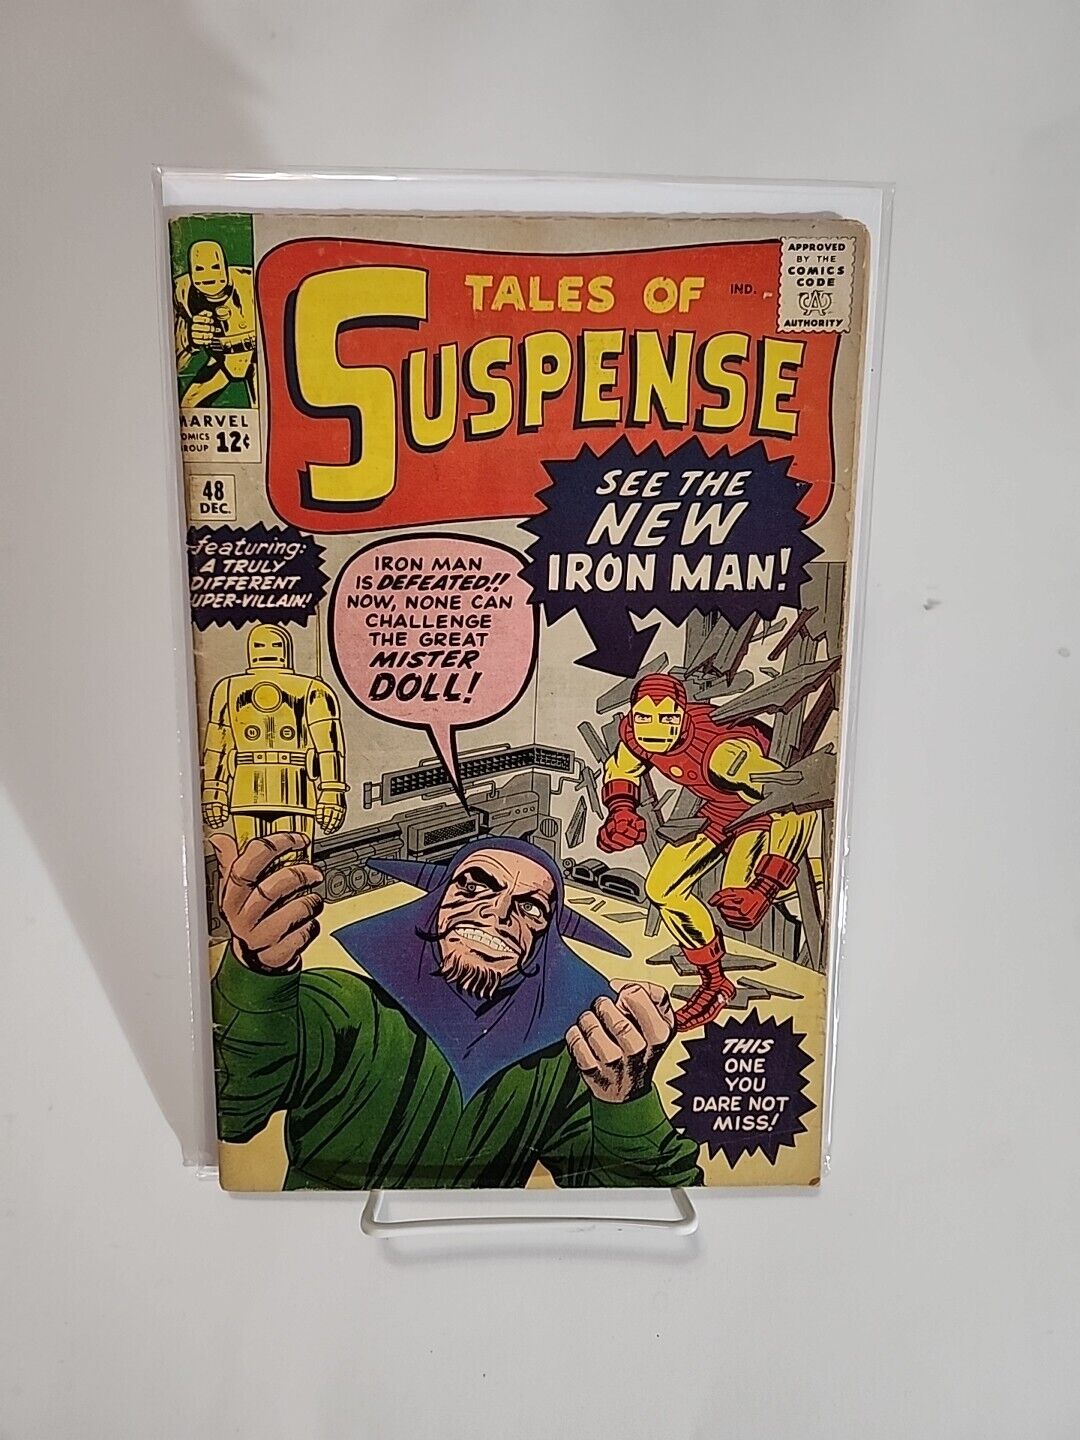 TALES OF SUSPENSE #48 (Marvel 1963) 1ST APPEARANCE OF RED & GOLD IRON MAN